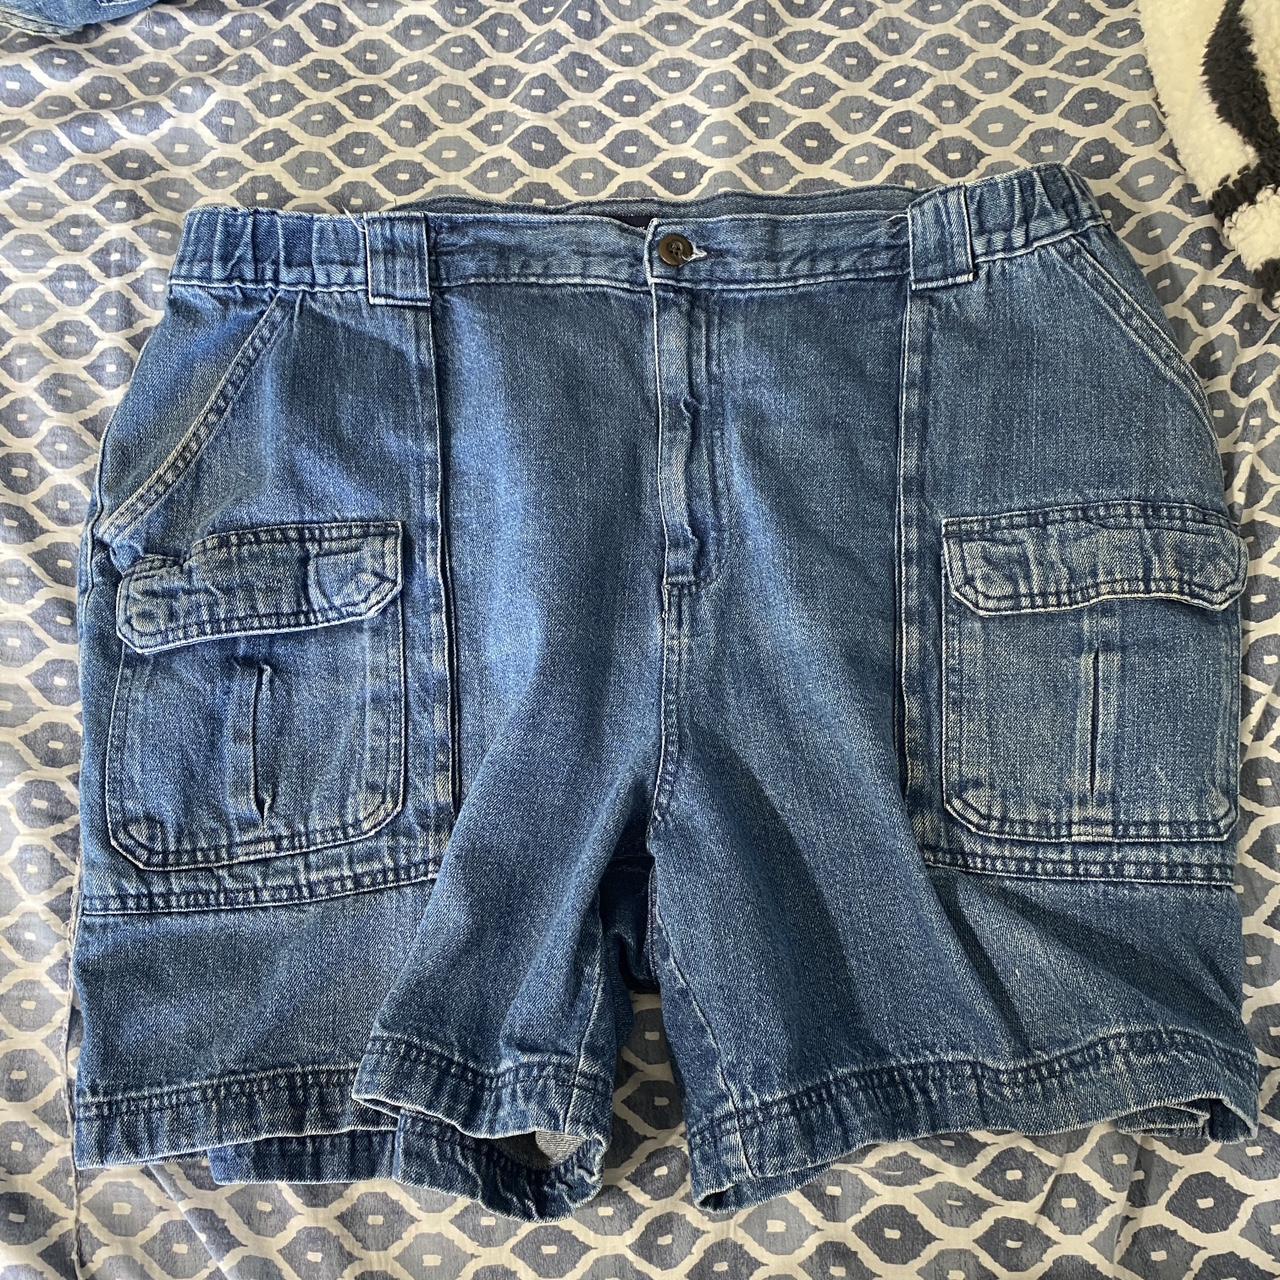 Really loose jorts good for summer and casual fits - Depop